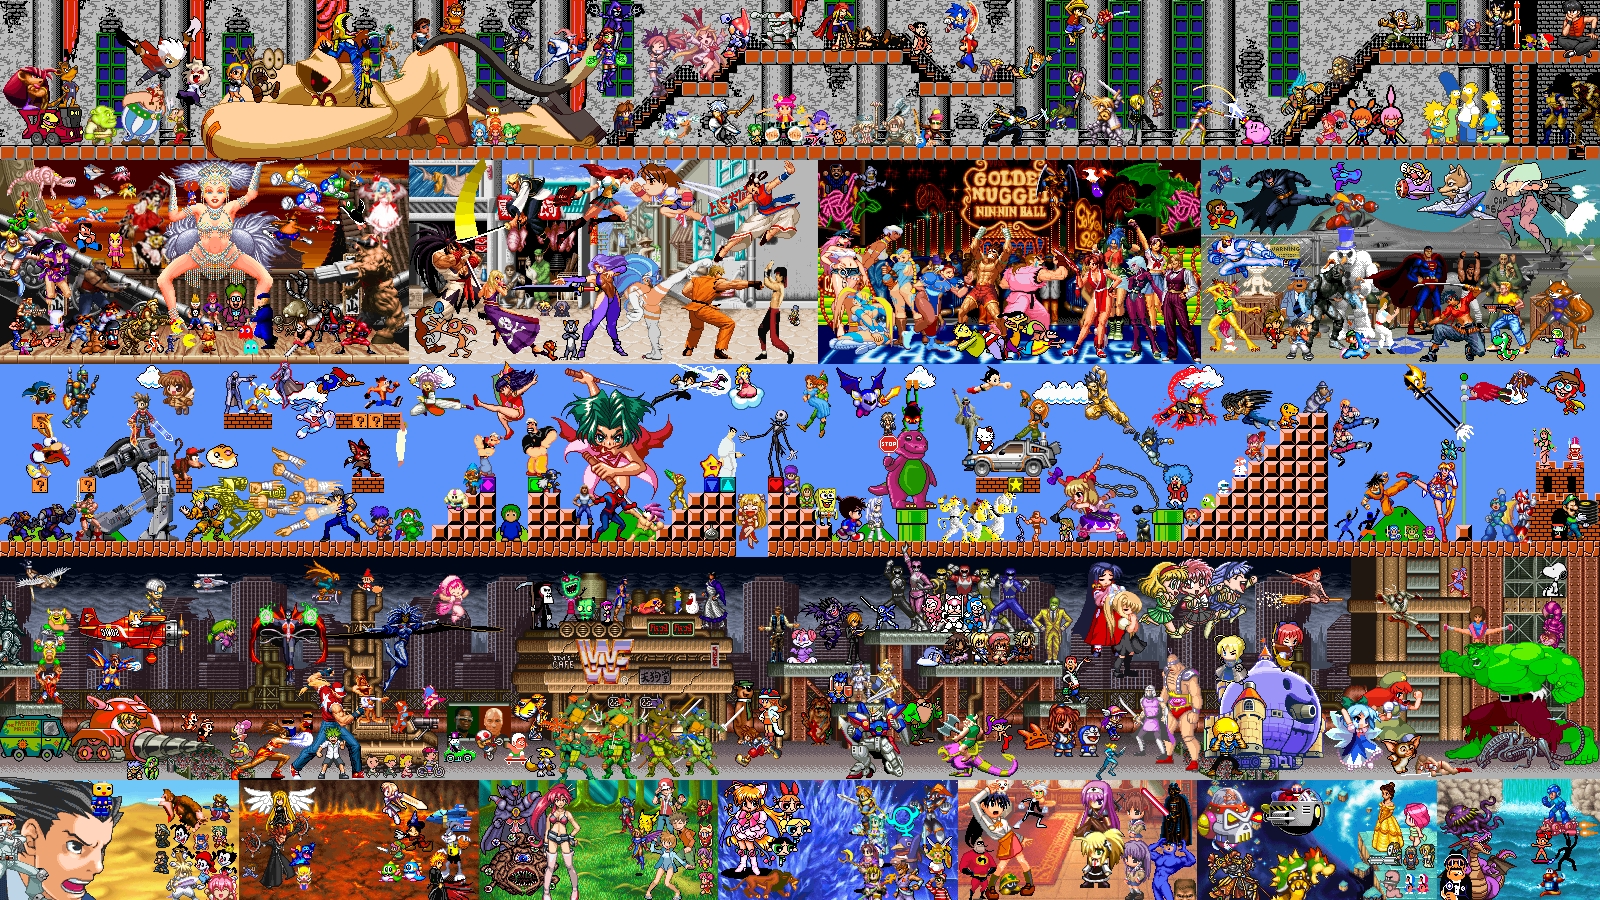 Download Wallpaper, Download 1920x1080 video games insane collage sprites 1600x900 wallpaper People HD Wallpaper, Hi Res People Wallpaper, High Definition Wallpaper